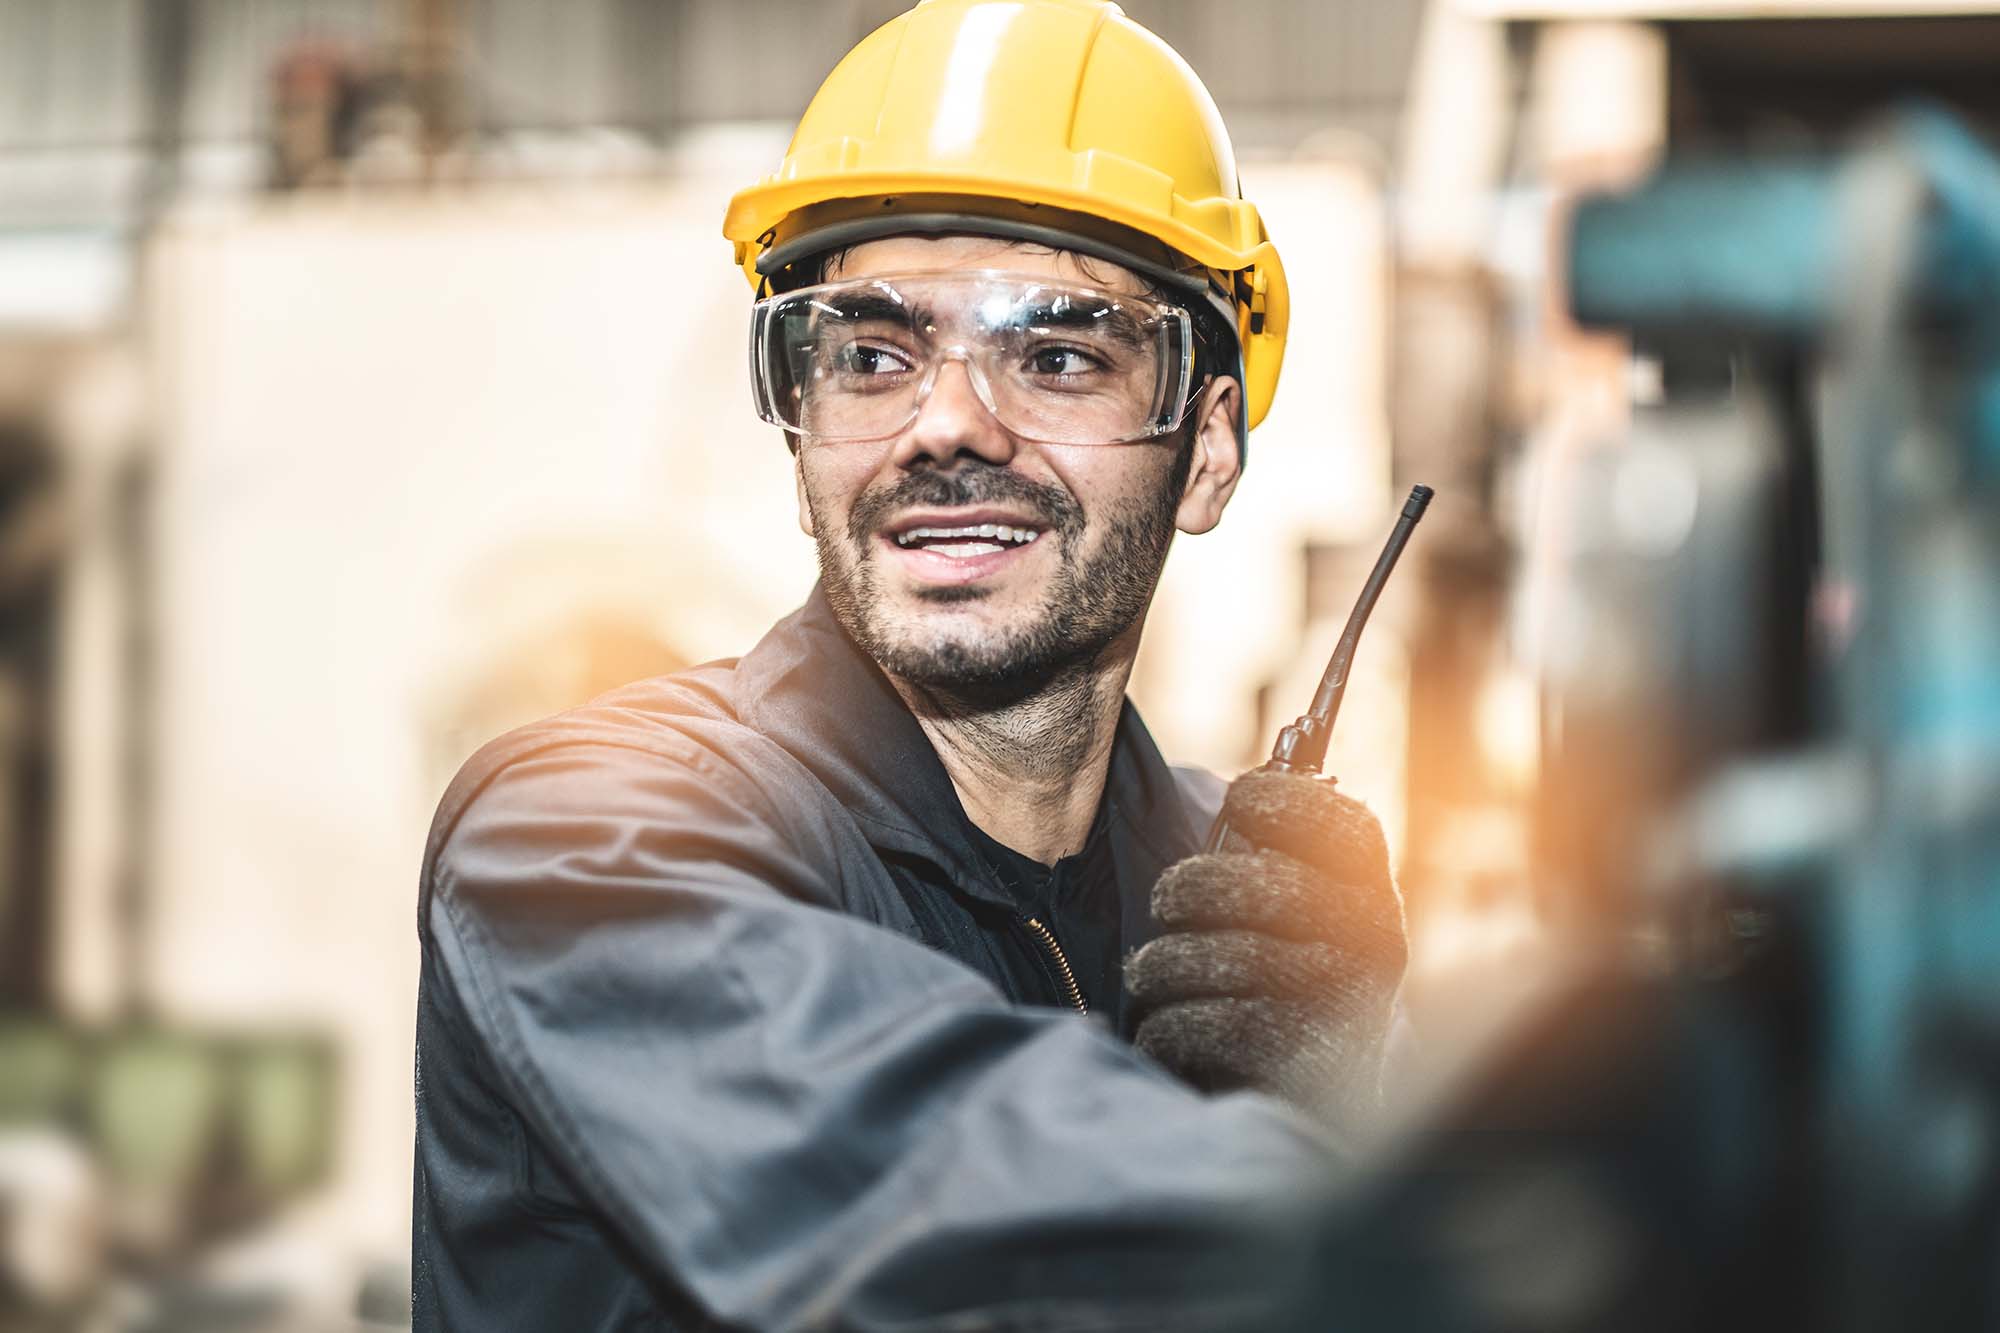 A man wearing a yellow safety helmet in an industrial facility.